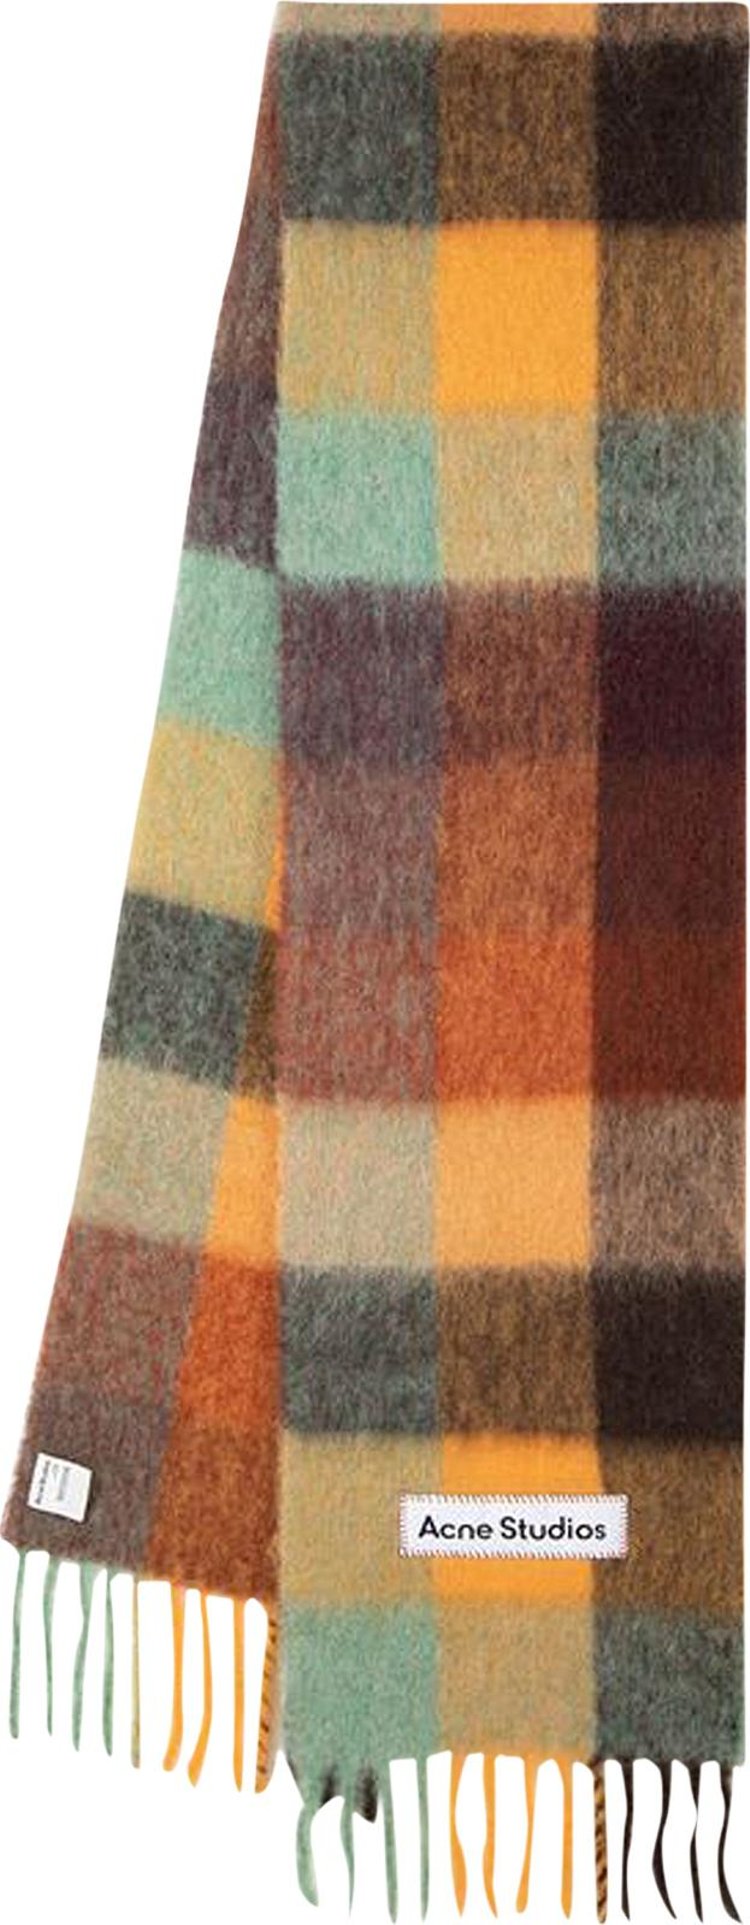 Acne Studios Mohair Checked Scarf 'Chestnut Brown/Yellow/Green'